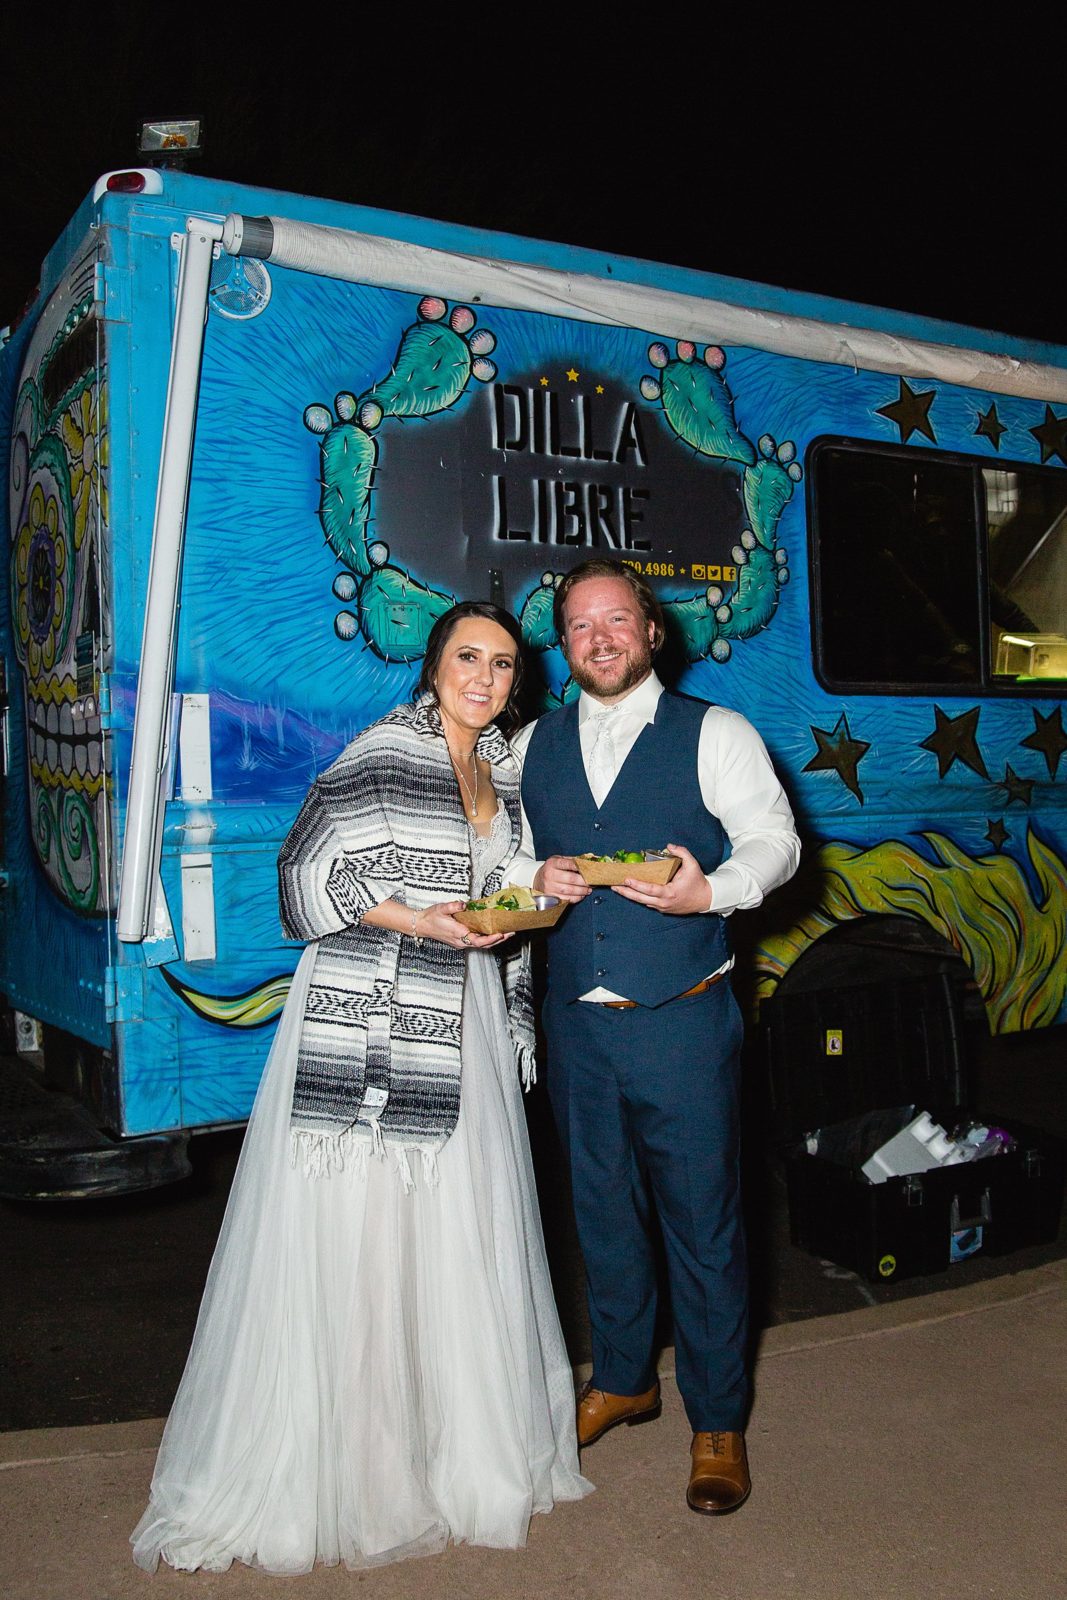 Bride and groom with their late night taco truck at their wedding reception by Arizona wedding photographer PMA Photography.